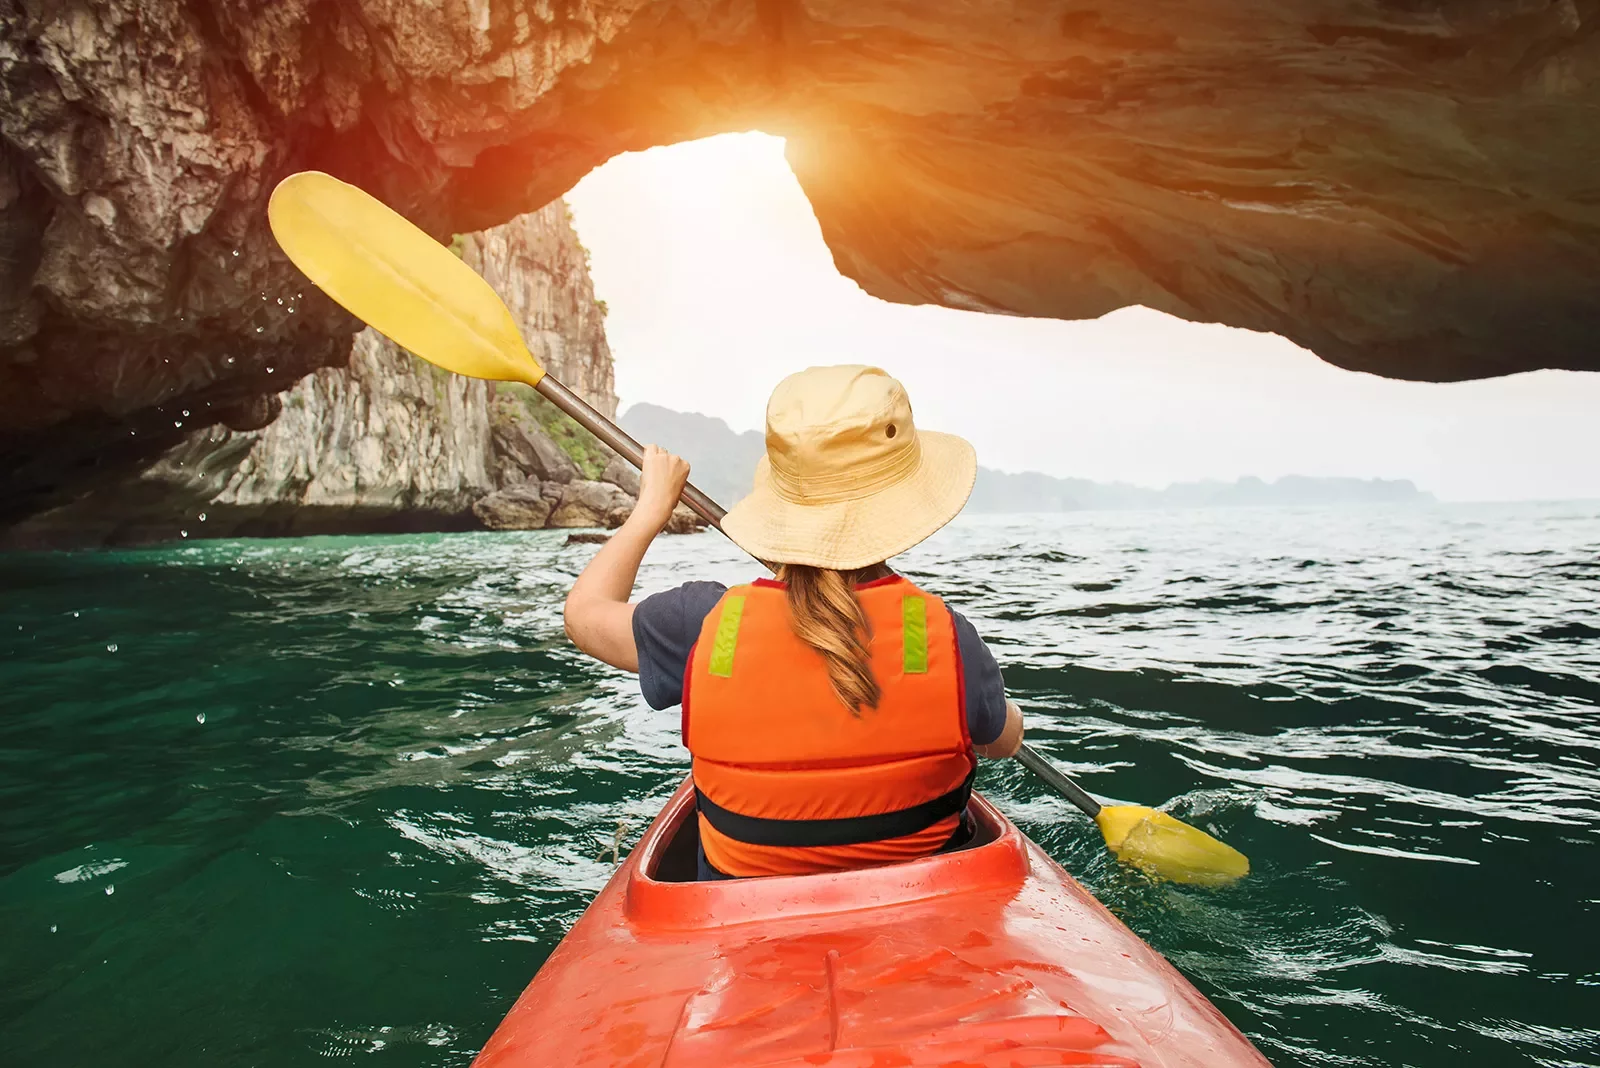 Kayaking among stone arches and cliffs in Vietnam